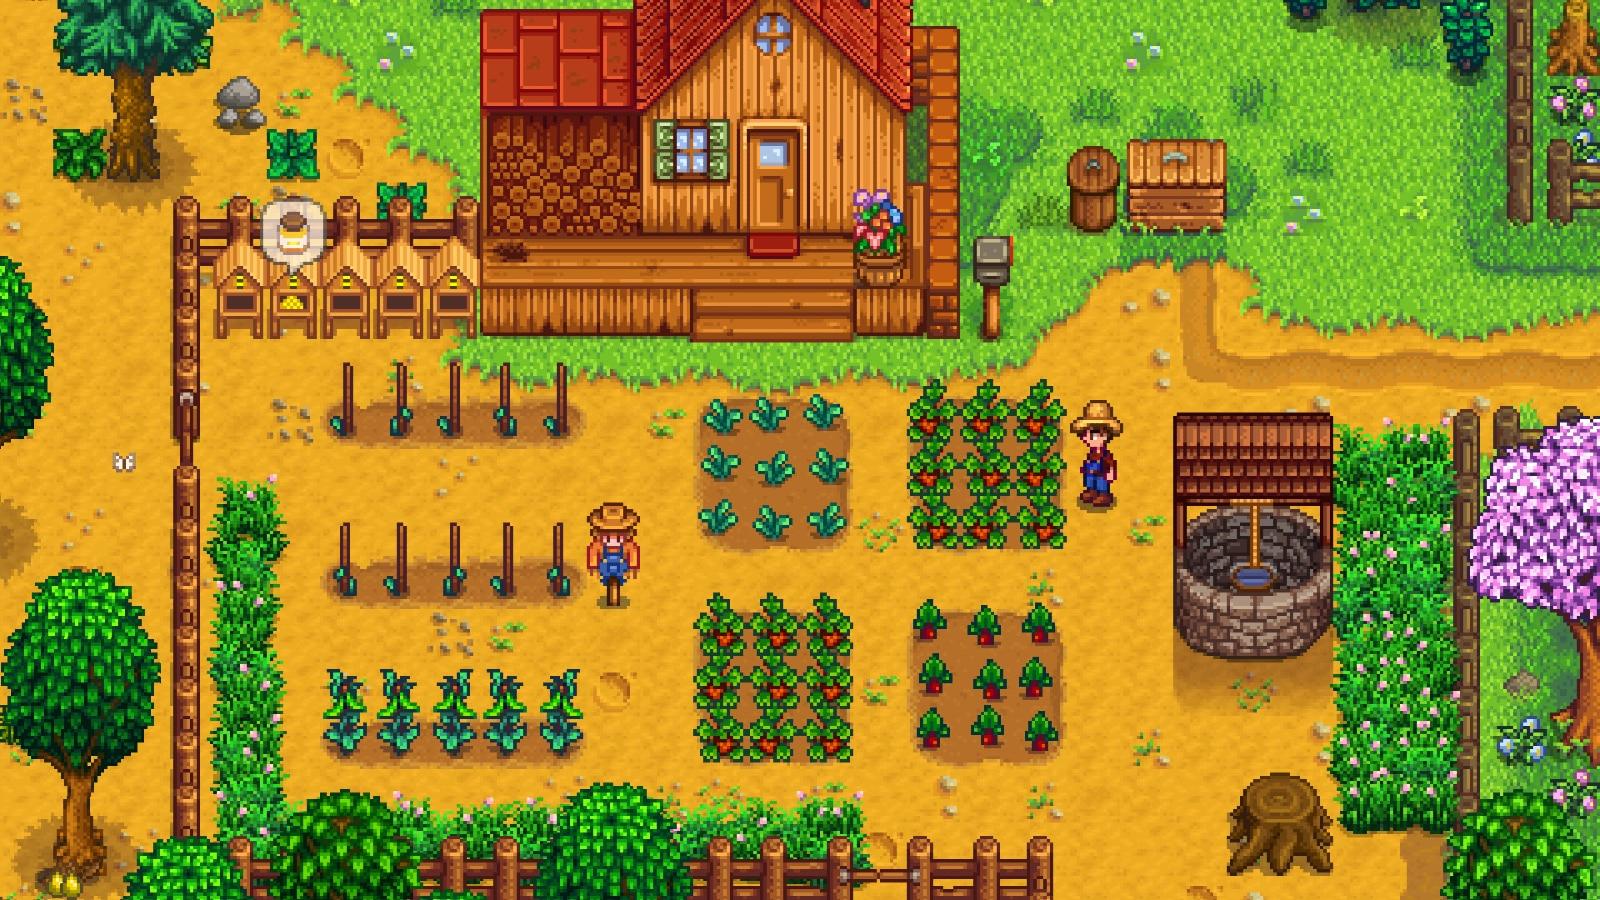 An image of gameplay in Stardew